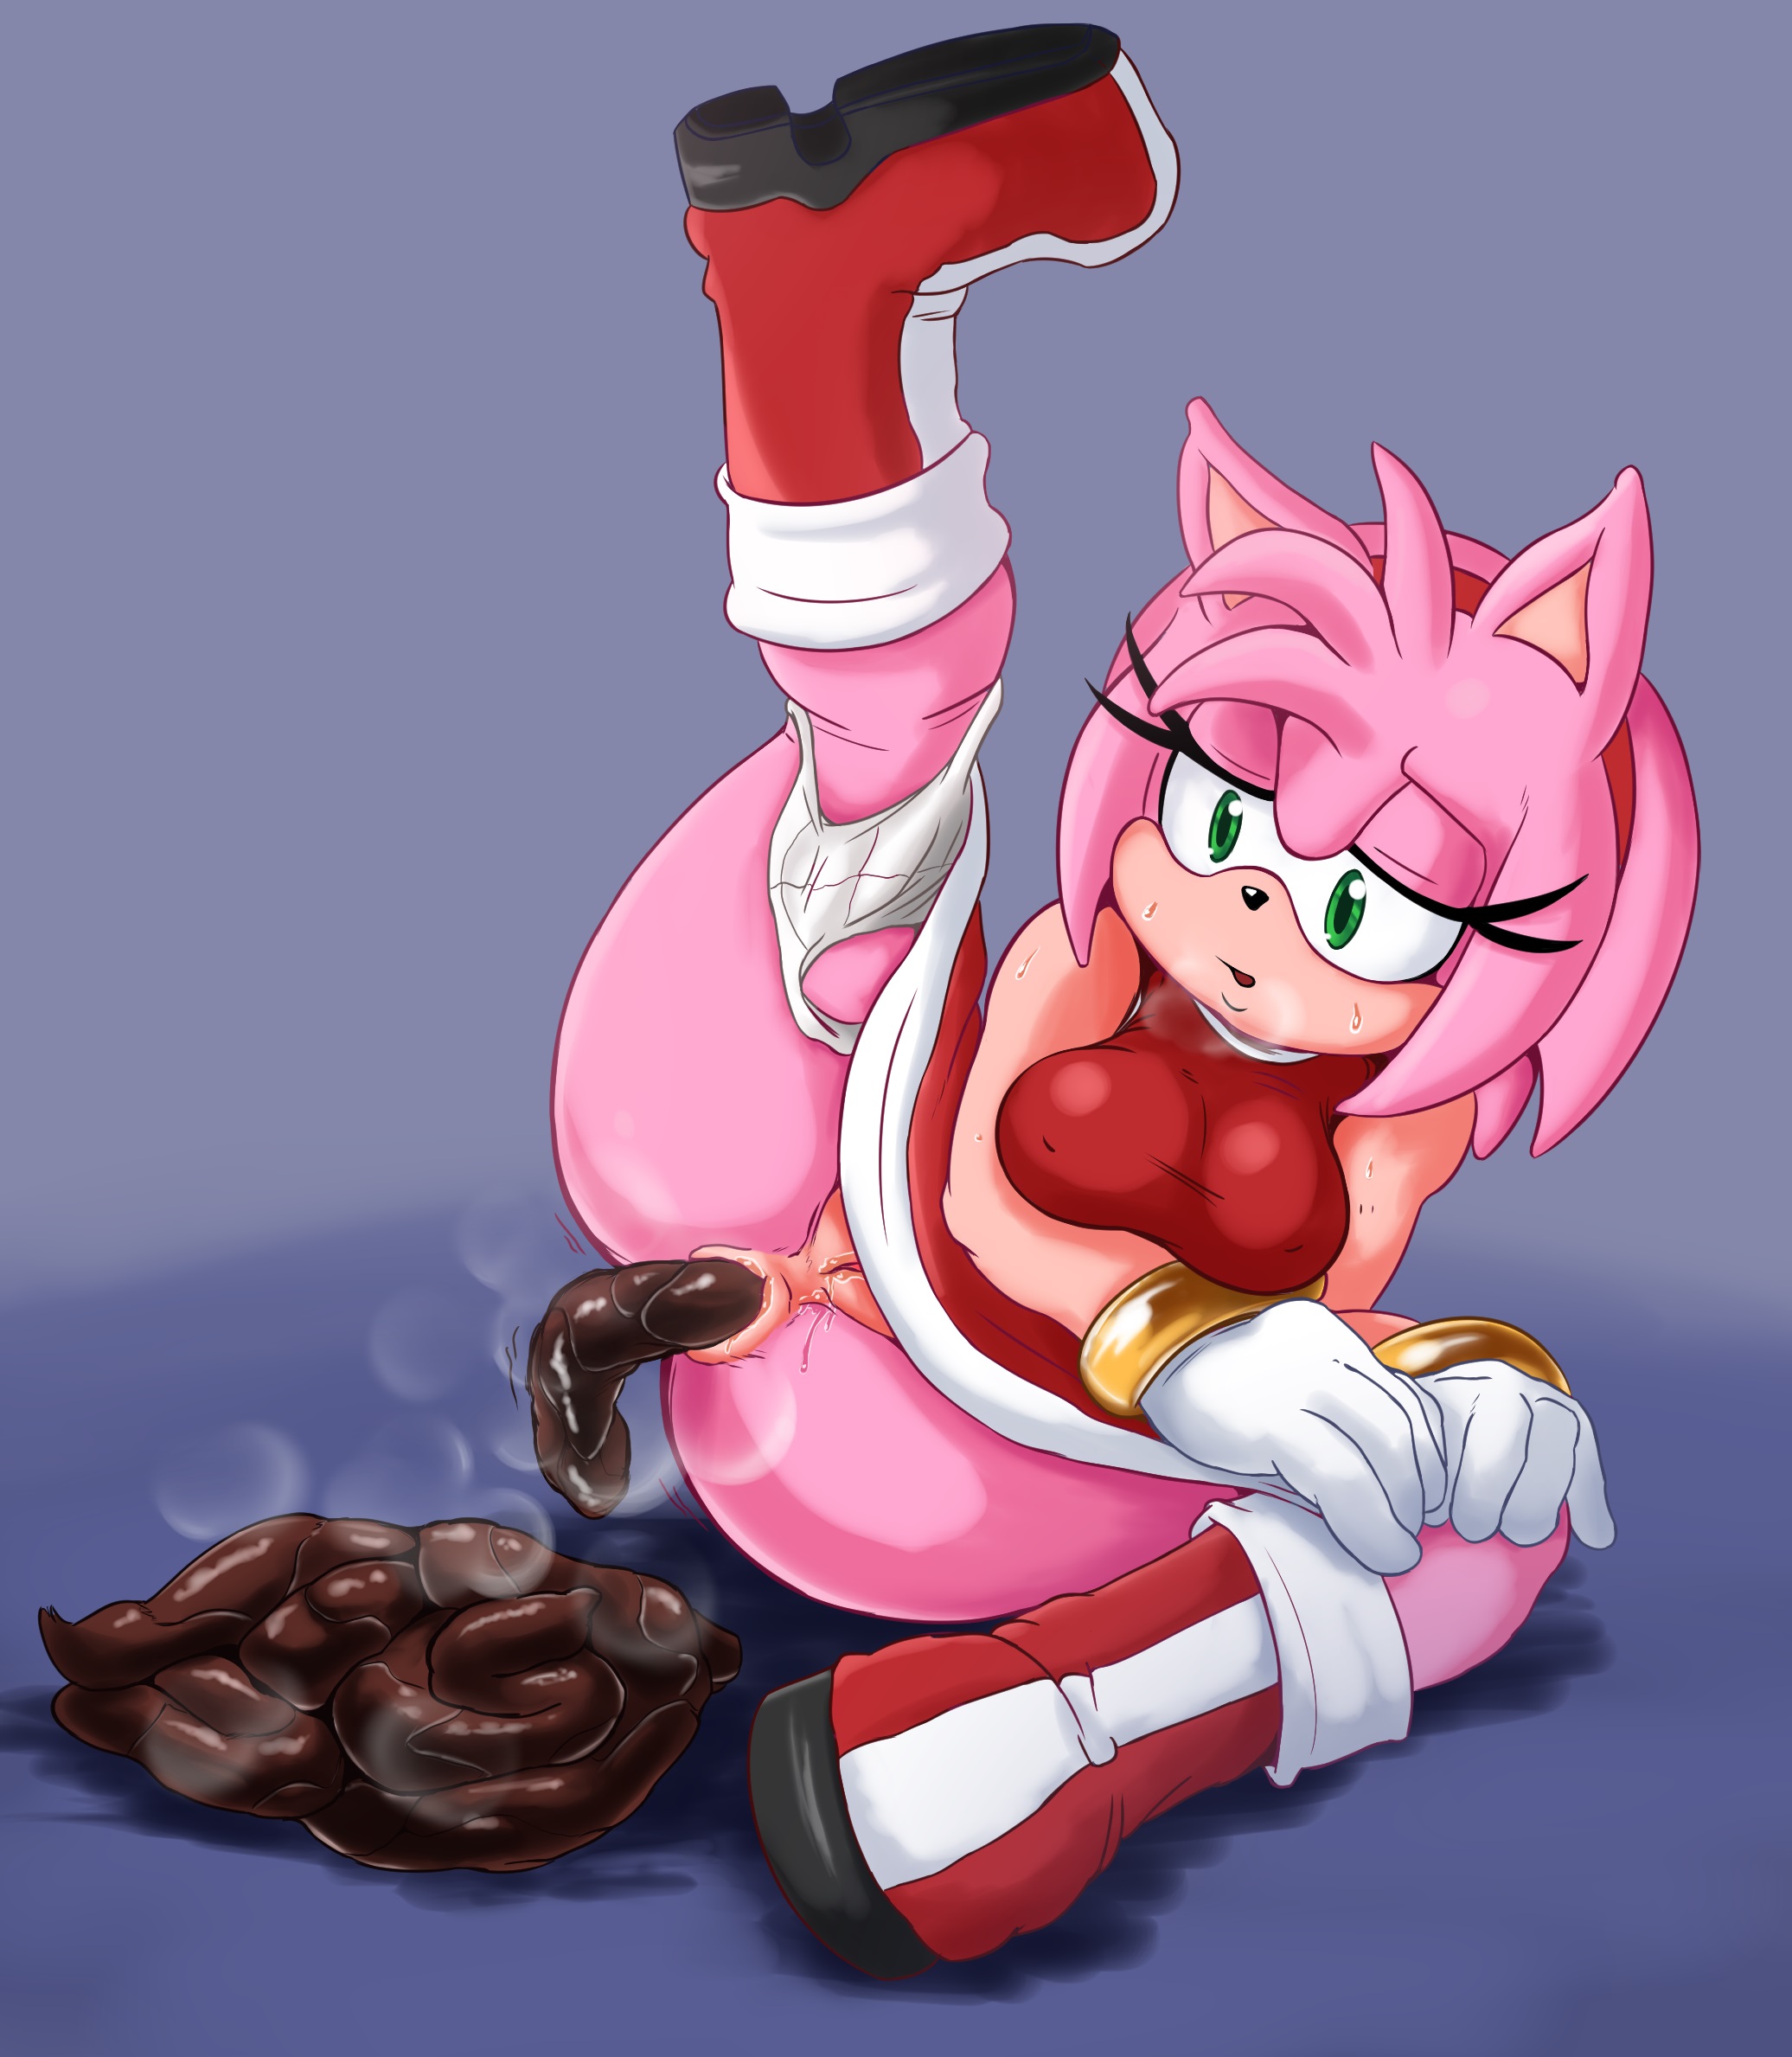 Amy rose toilet